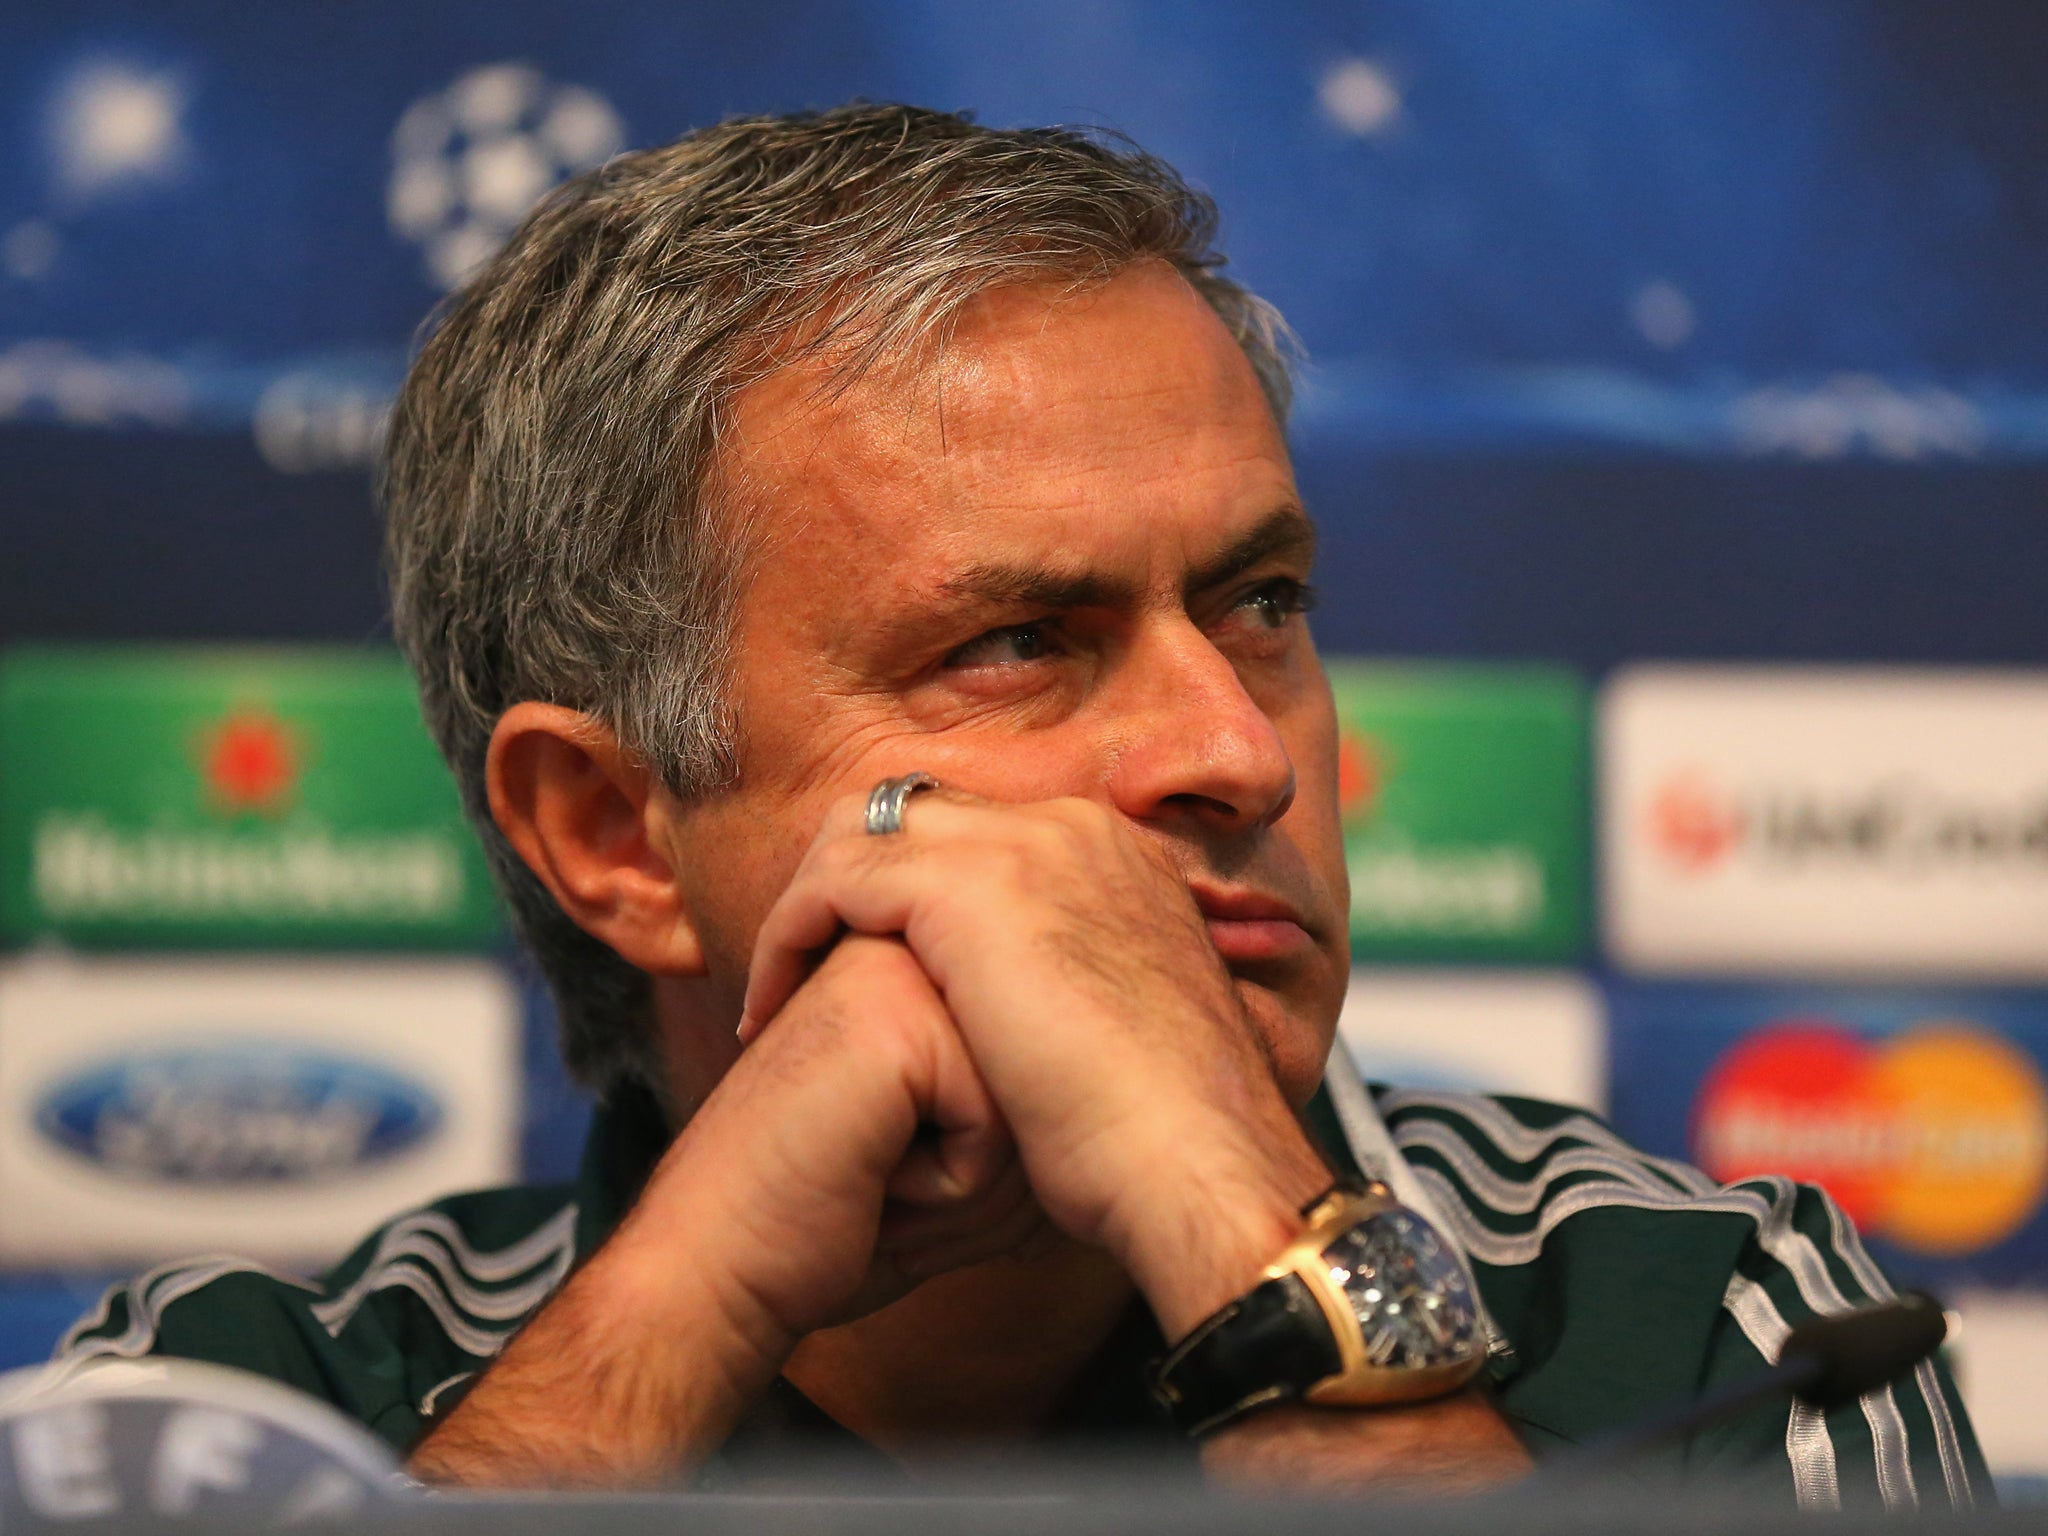 Mourinho will become the youngest coach to clock up 100 Champions League matches